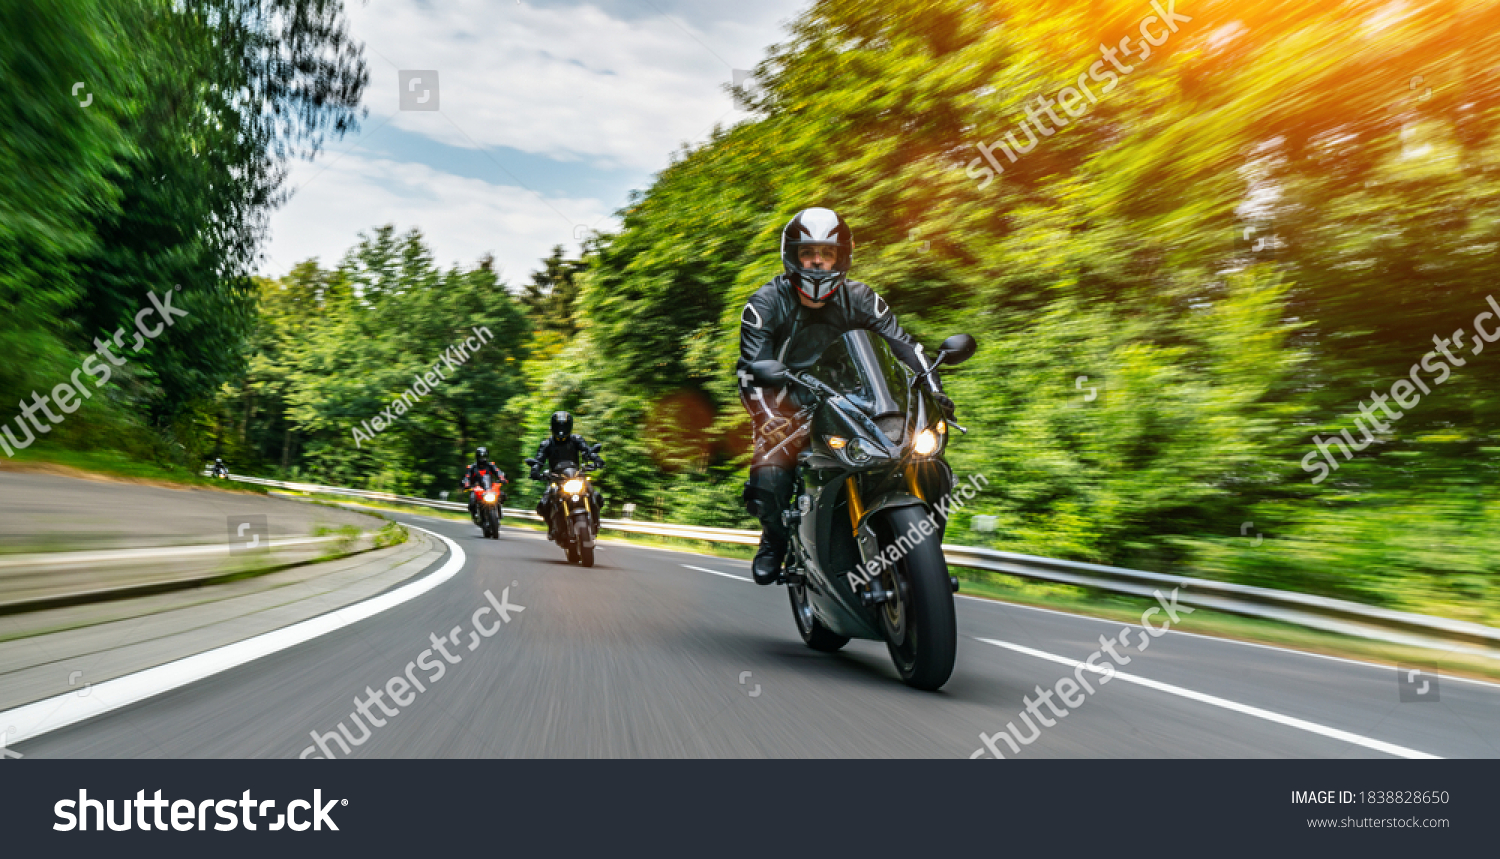 motorbike on the road riding. having fun driving the empty road on a motorcycle tour journey. copyspace for your individual text. Fast Motion Blur effect #1838828650